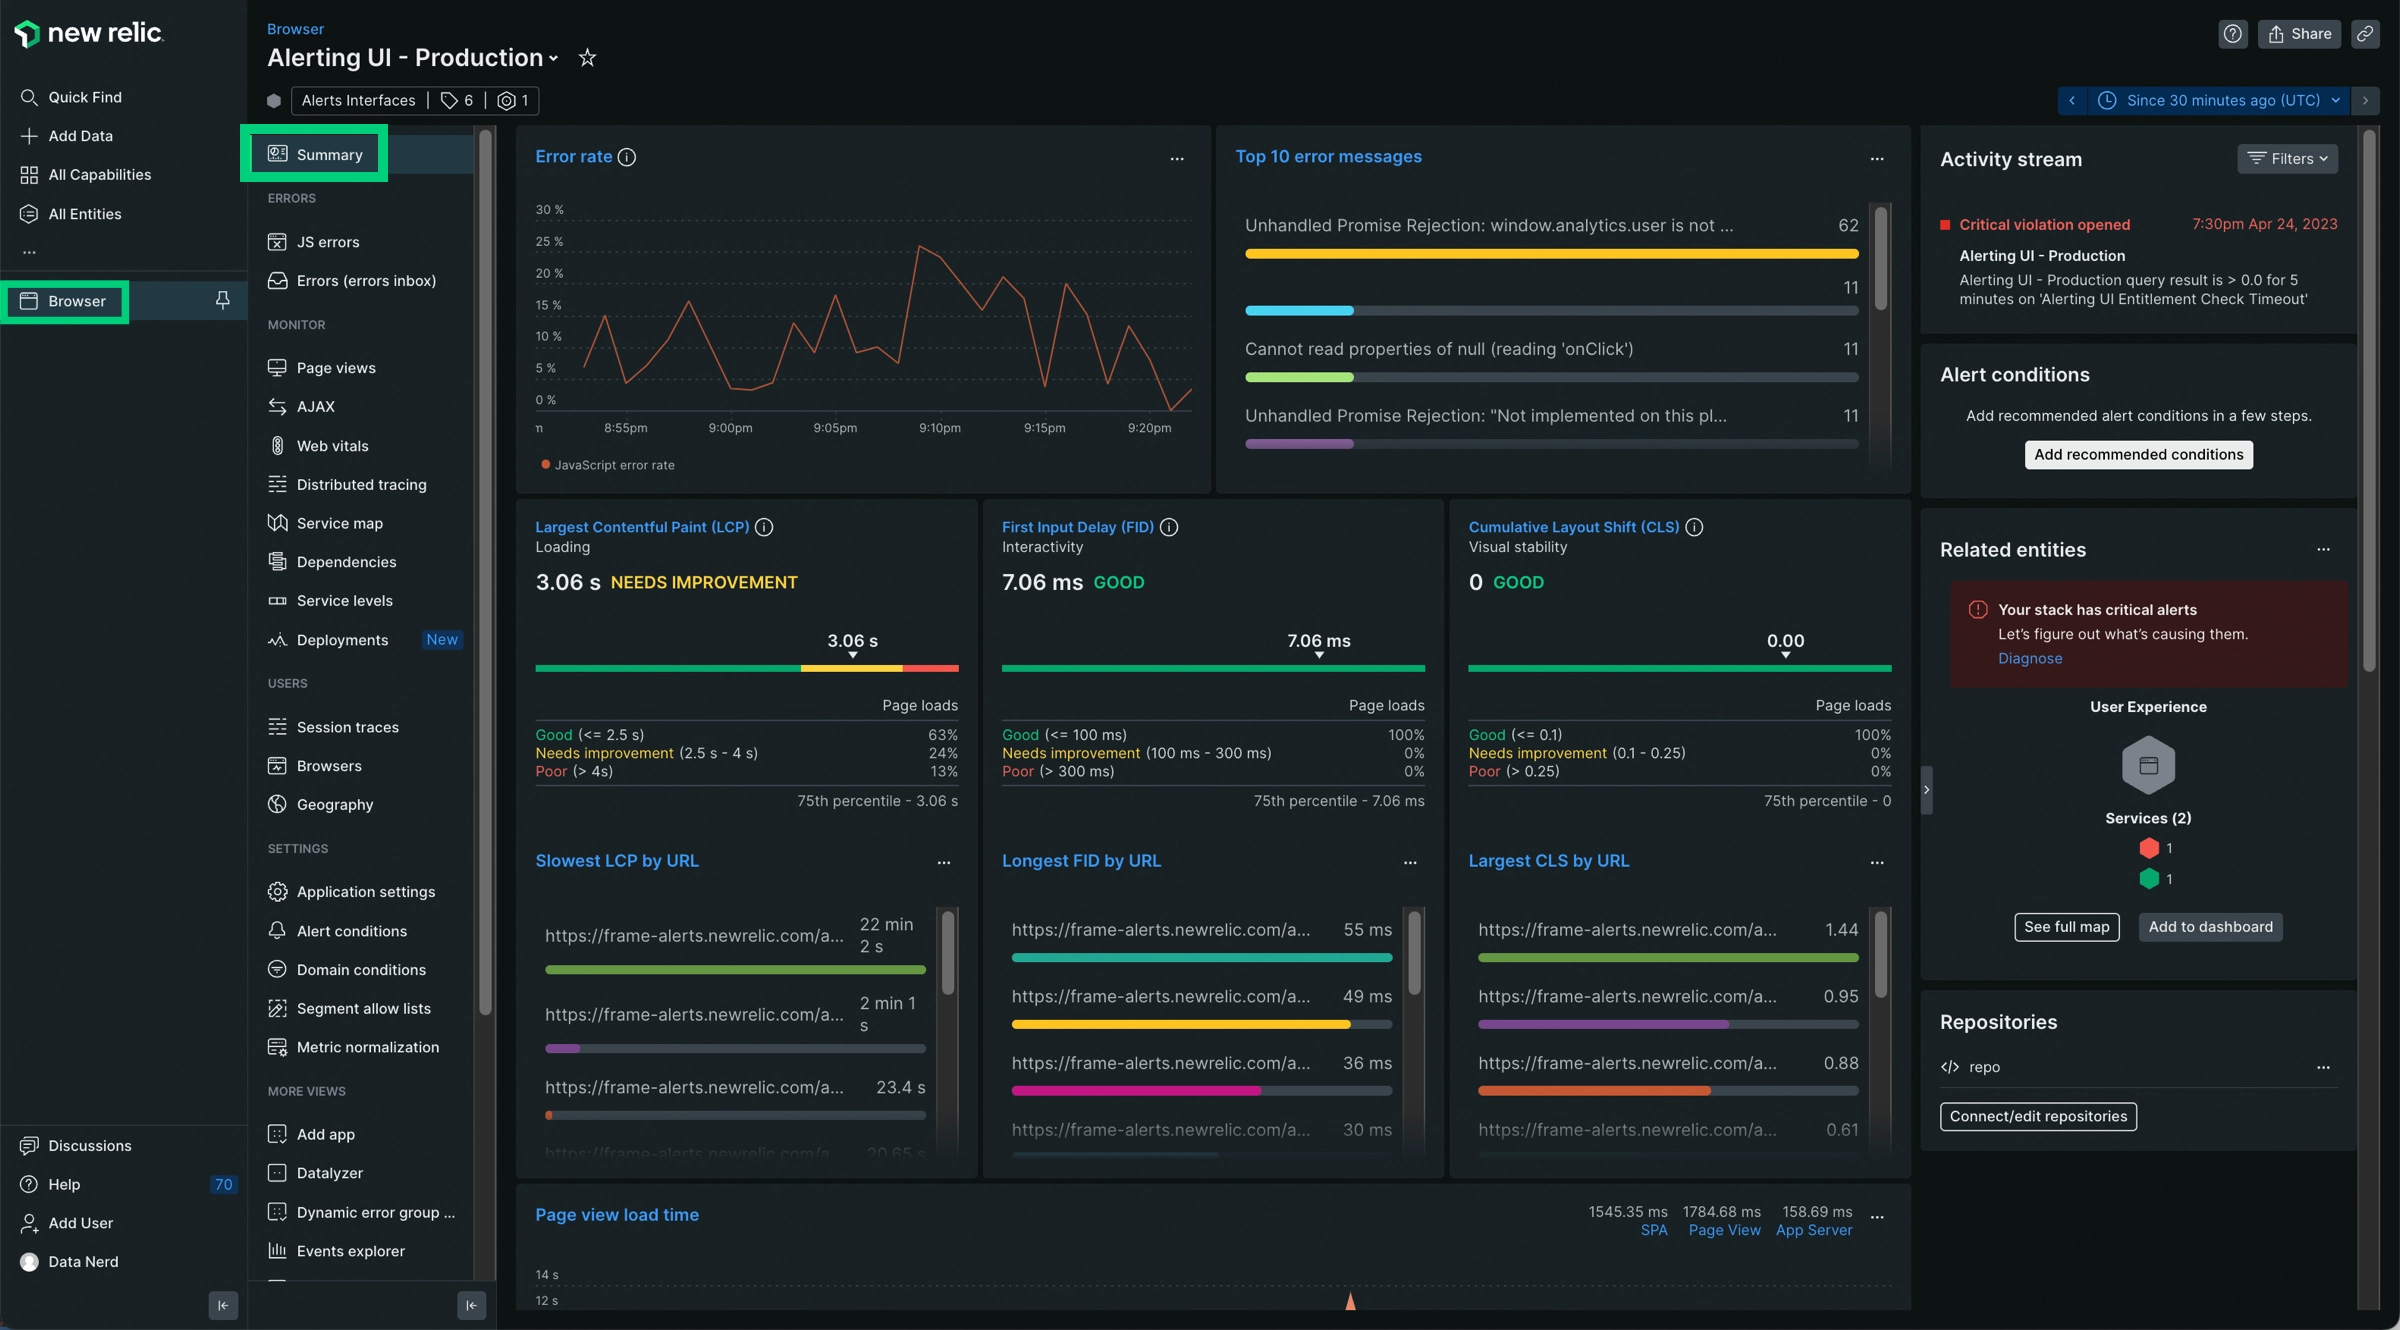 Screenshot of the New Relic browser monitoring summary page